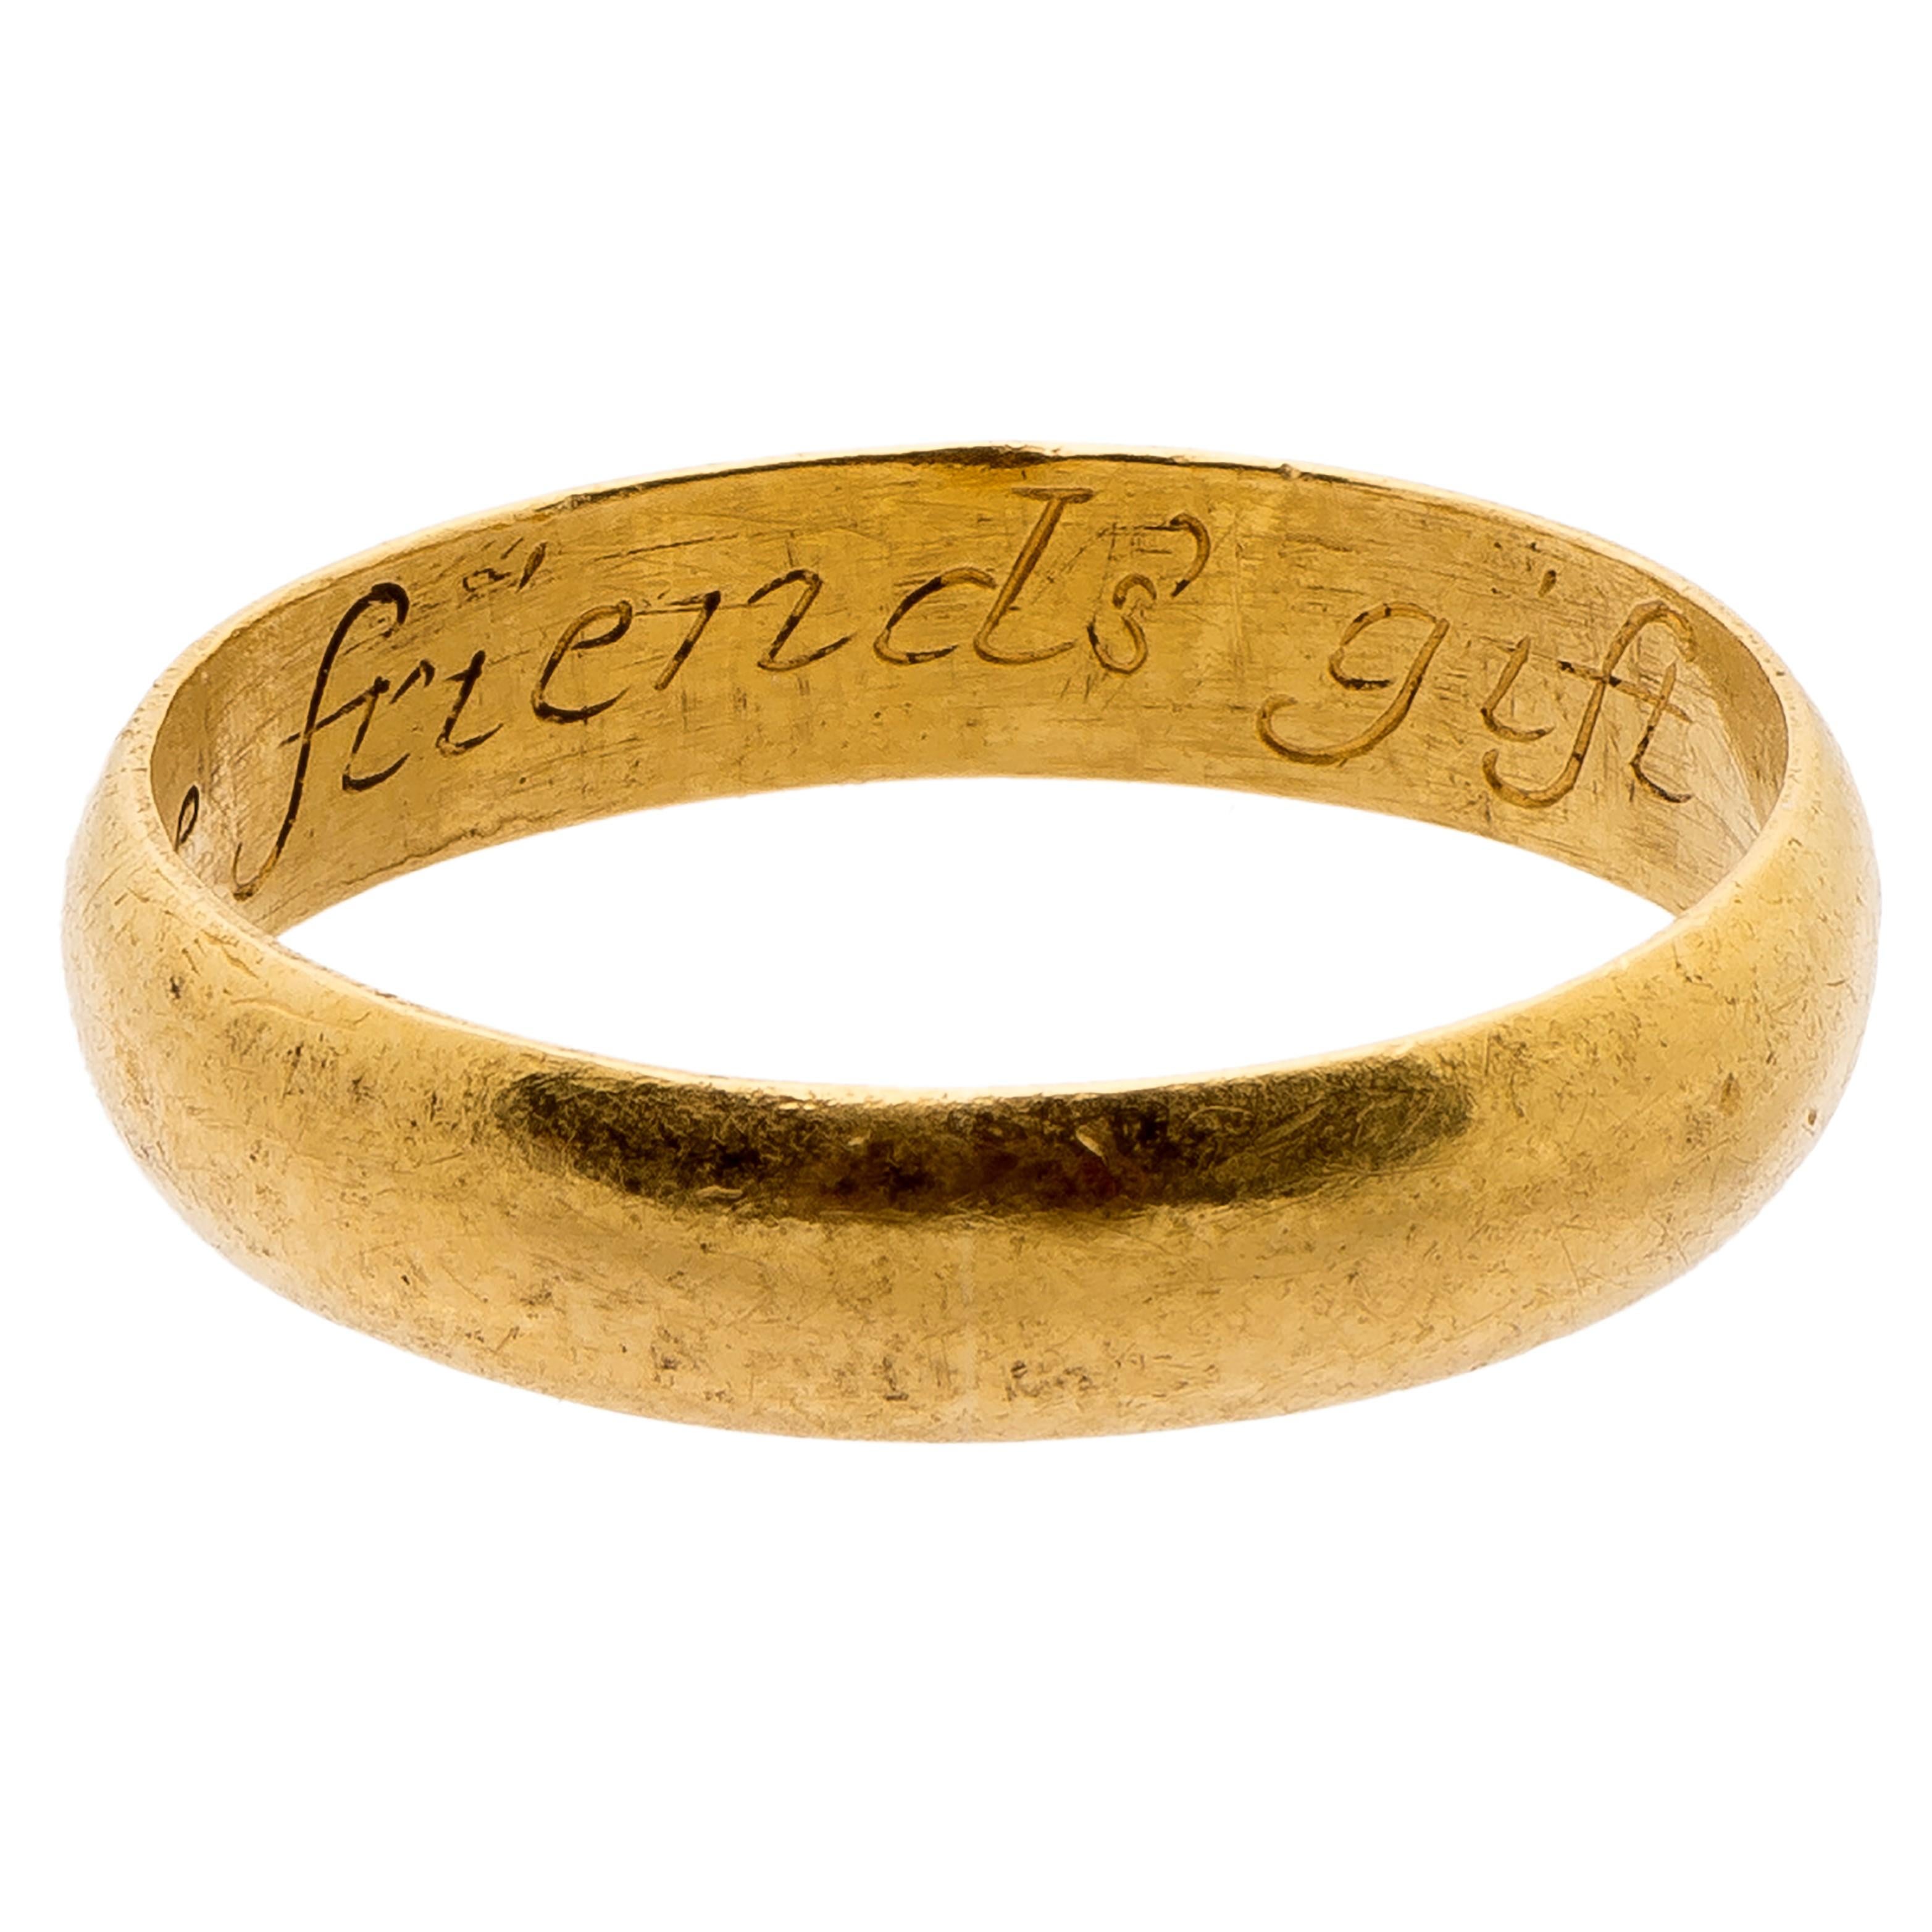 Posy Ring, “A true friends gift”
England (Plymouth ?), first half of 18th century  
Gold
Weight 4.2 gr.; circumference 60.38 mm.; US size 9.25, UK size S ¼

Description:
Wide gold band with D-section, plain on the exterior and on the interior is the